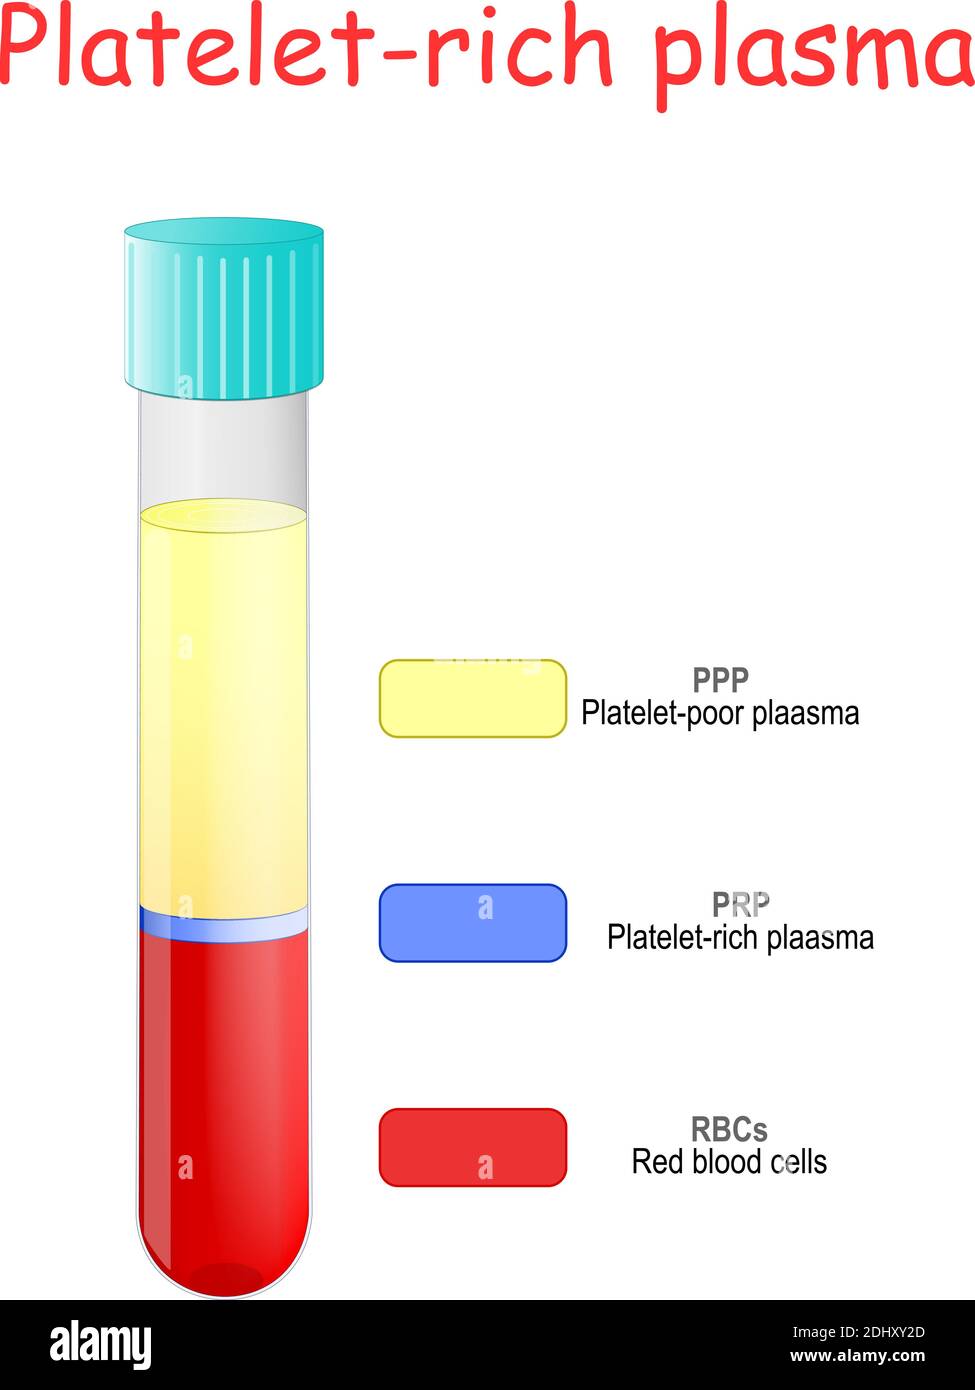 Platelet-rich plasma. layers of blood in glassware tube. Test tube with PRP. in vitro. Stock Vector